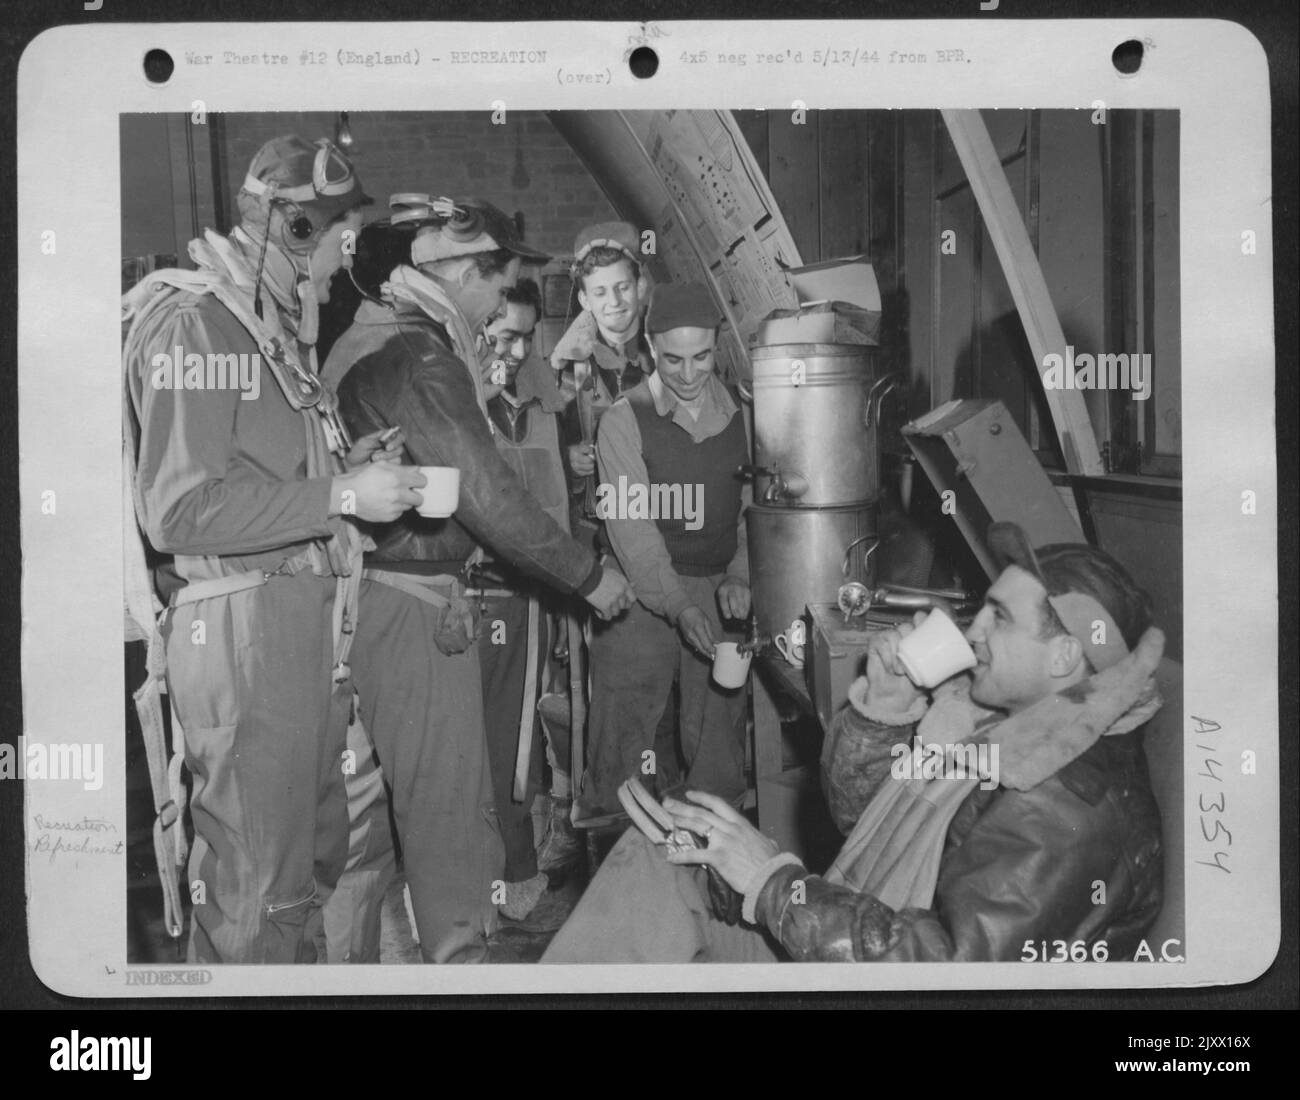 In fighting togs, these Marauder-men-members of the crew of the Martin B-26 Marauder medium bomber, 'Sad Sack' get a final tune-up around the coffee pot in their crew room. Hot coffee and biscuits 'Down the hatch,' these fliers took off a few minutes Stock Photo